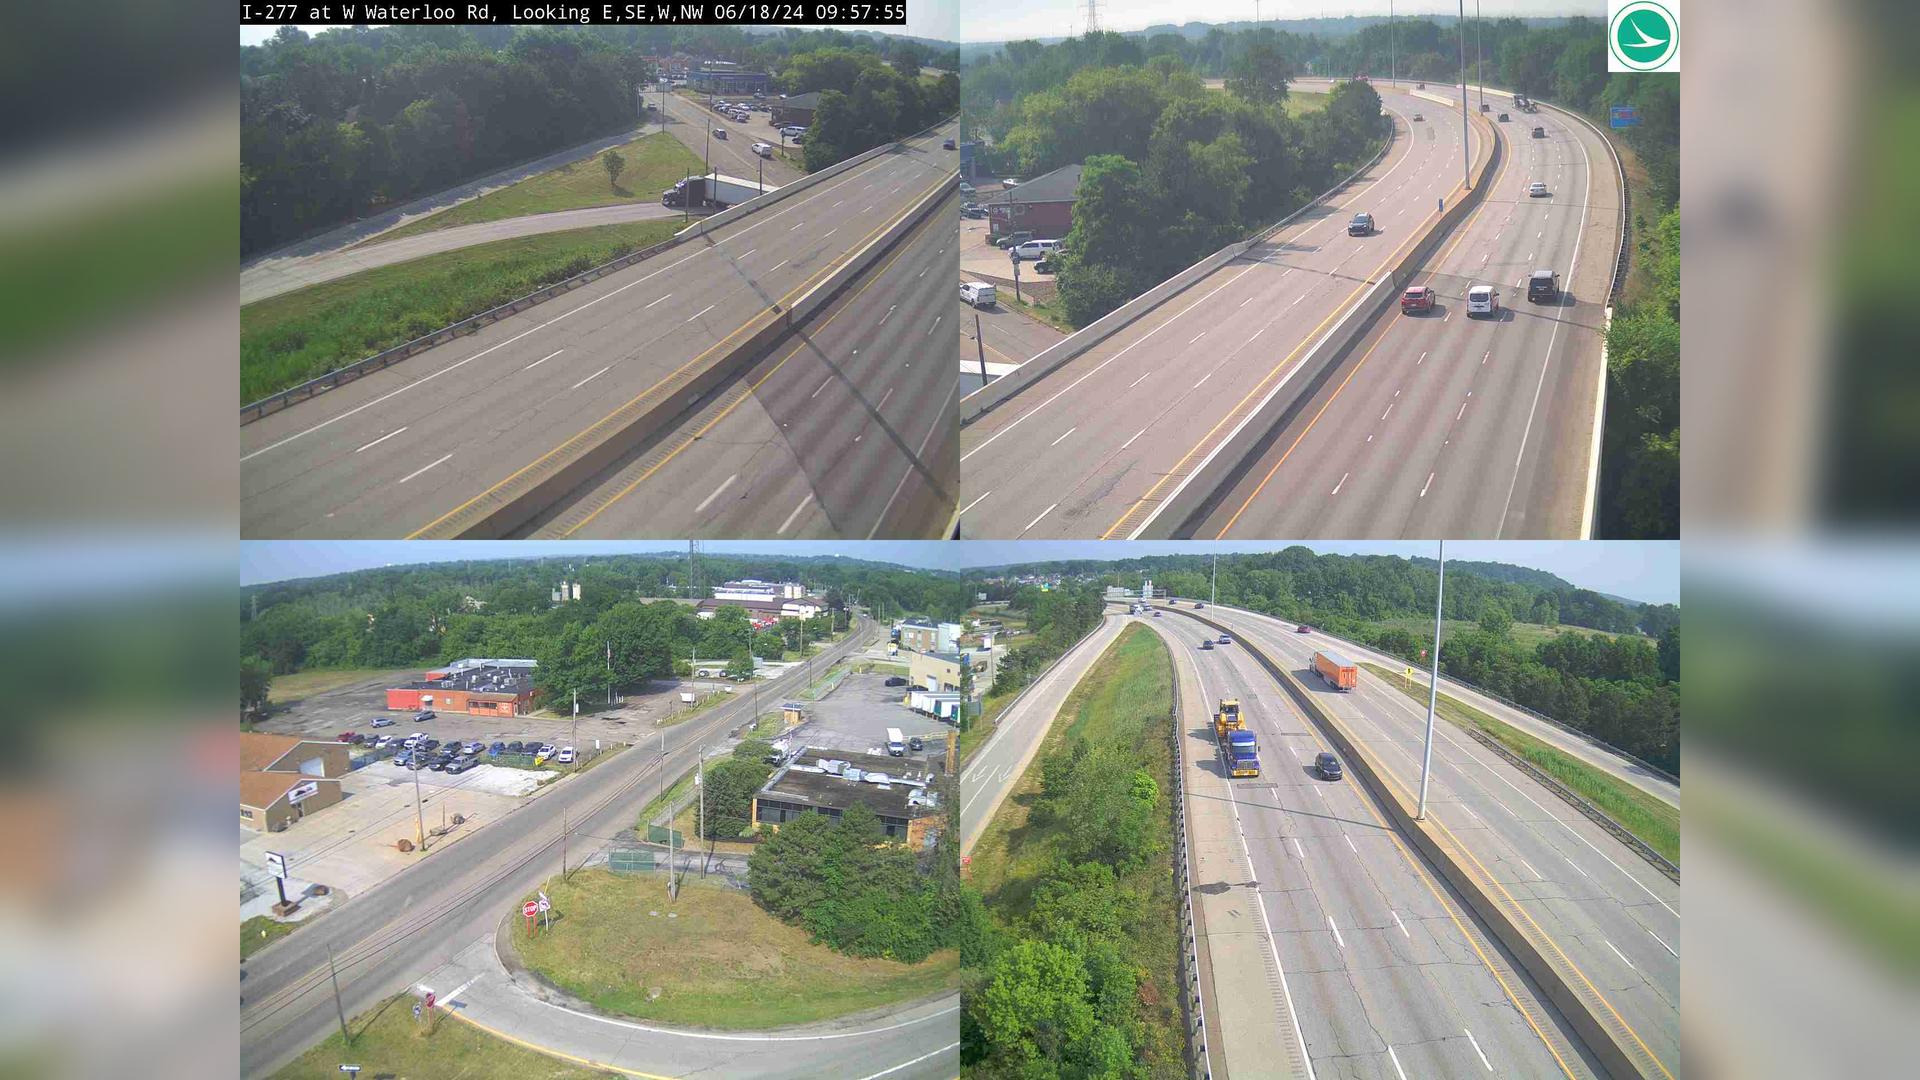 Traffic Cam Akron: I-277 at W Waterloo Rd Player